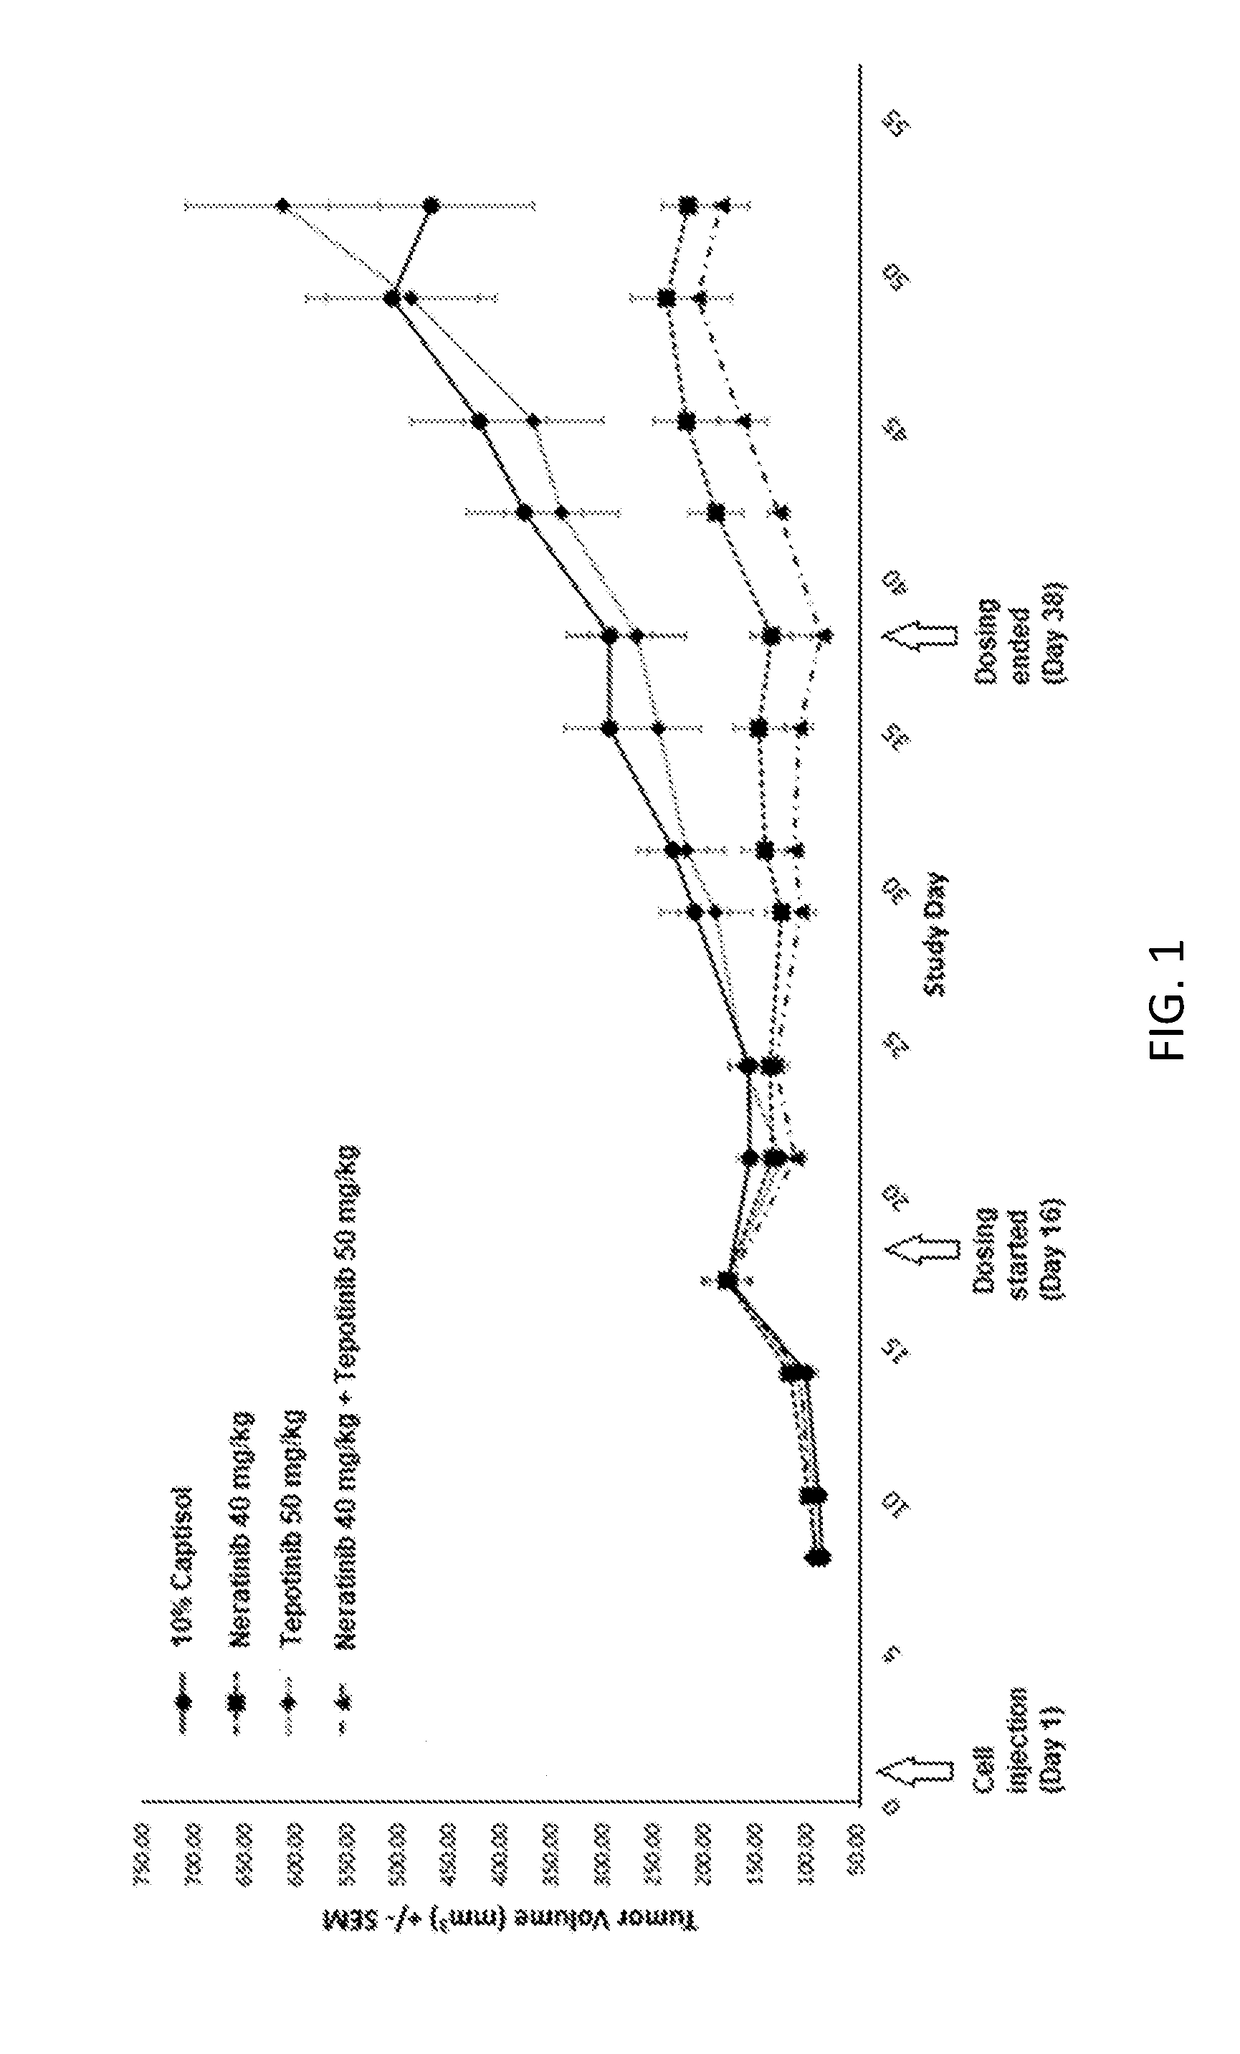 Methods of measuring signaling pathway activity for selection of therapeutic agents